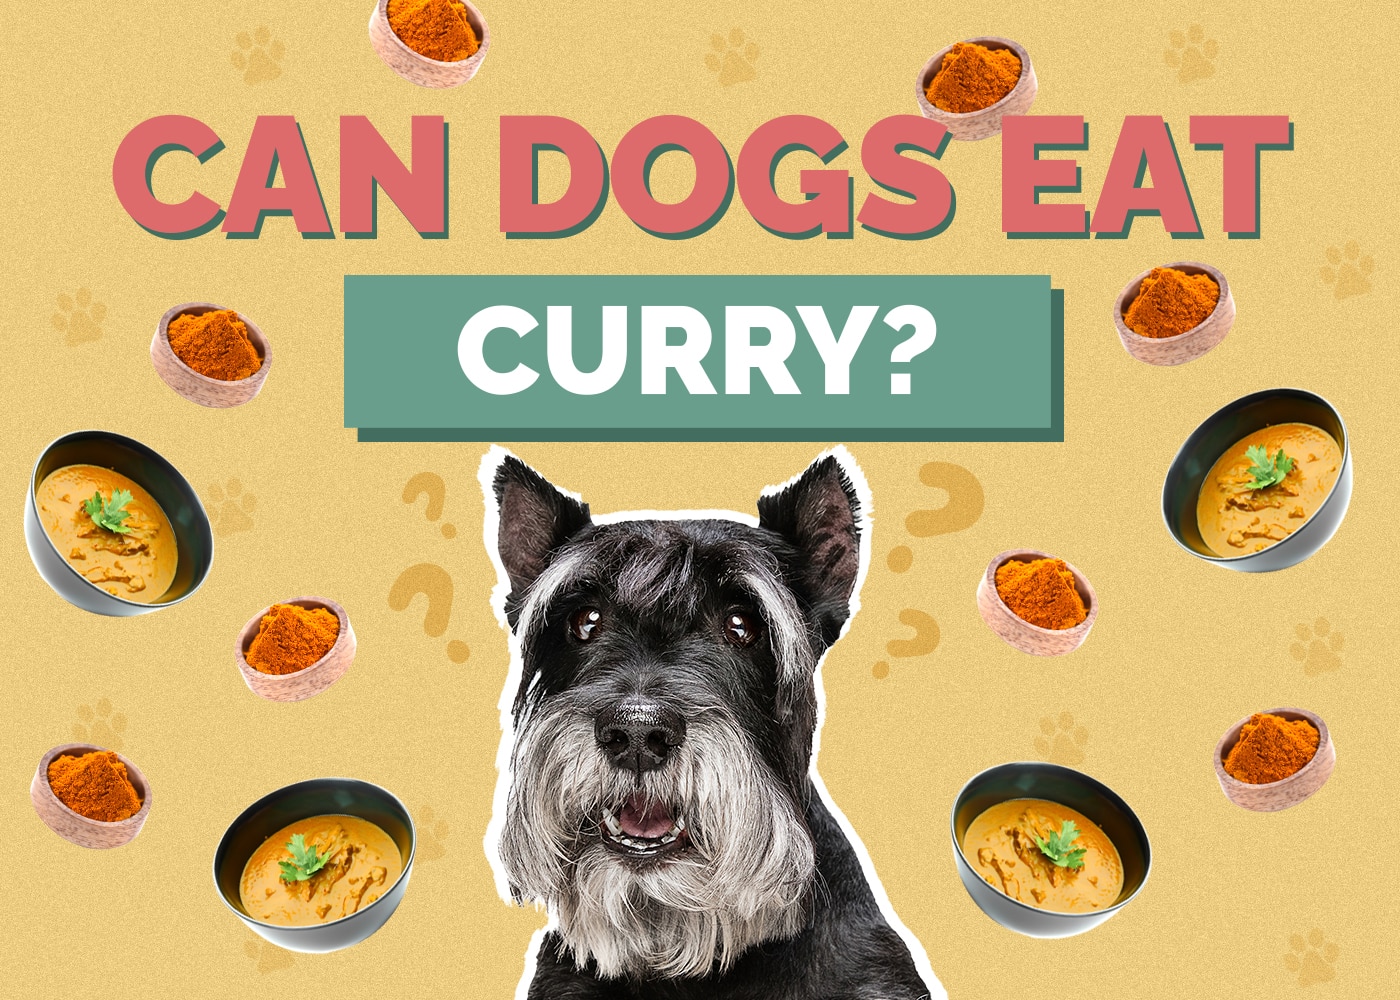 Can Dog Eat curry